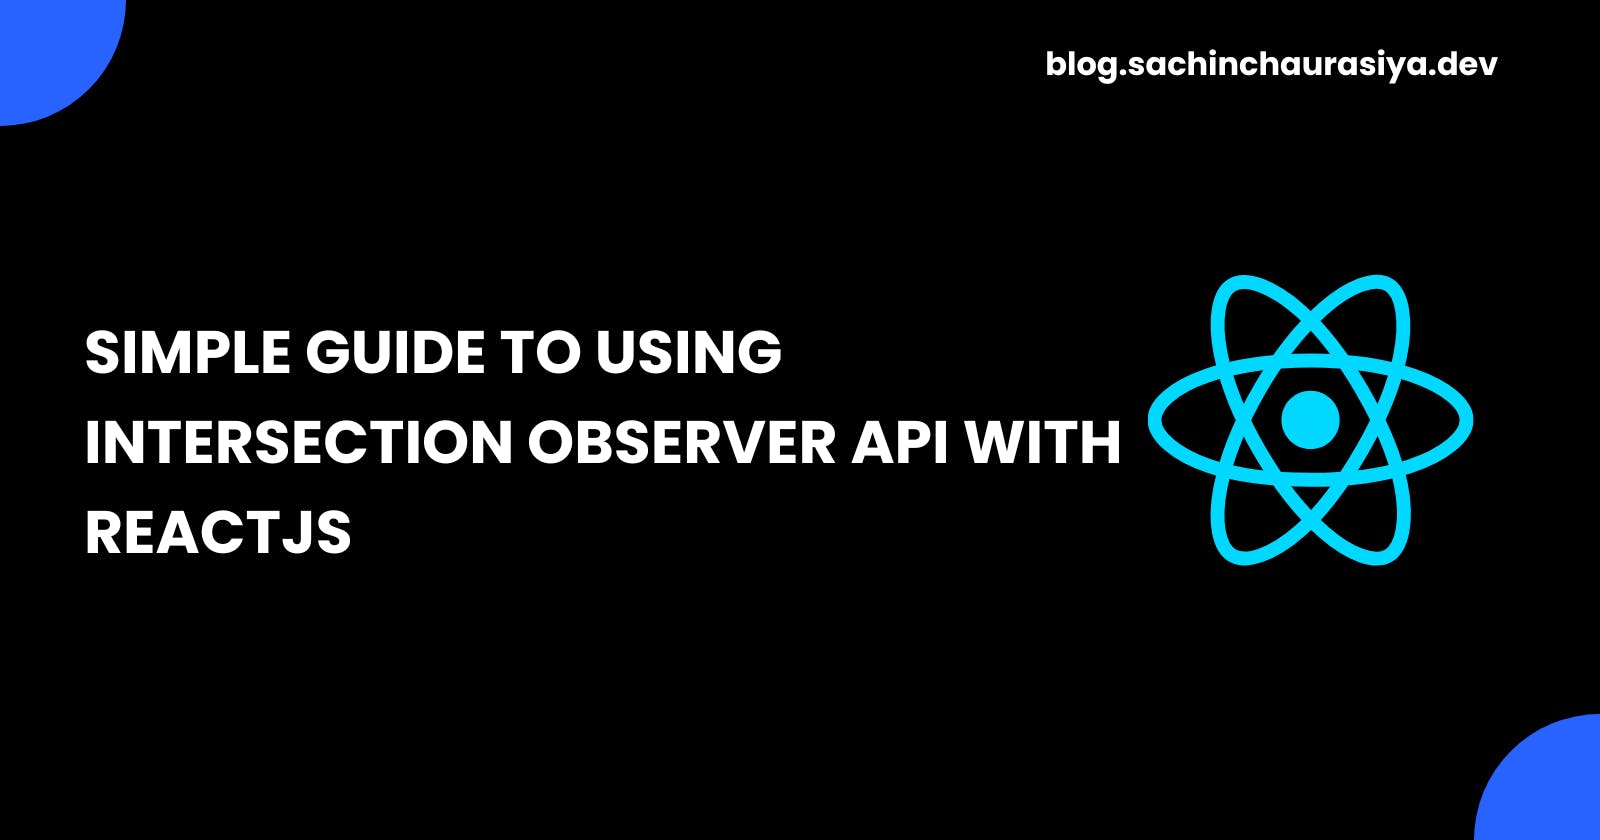 Simple Guide to Using Intersection Observer API with ReactJS